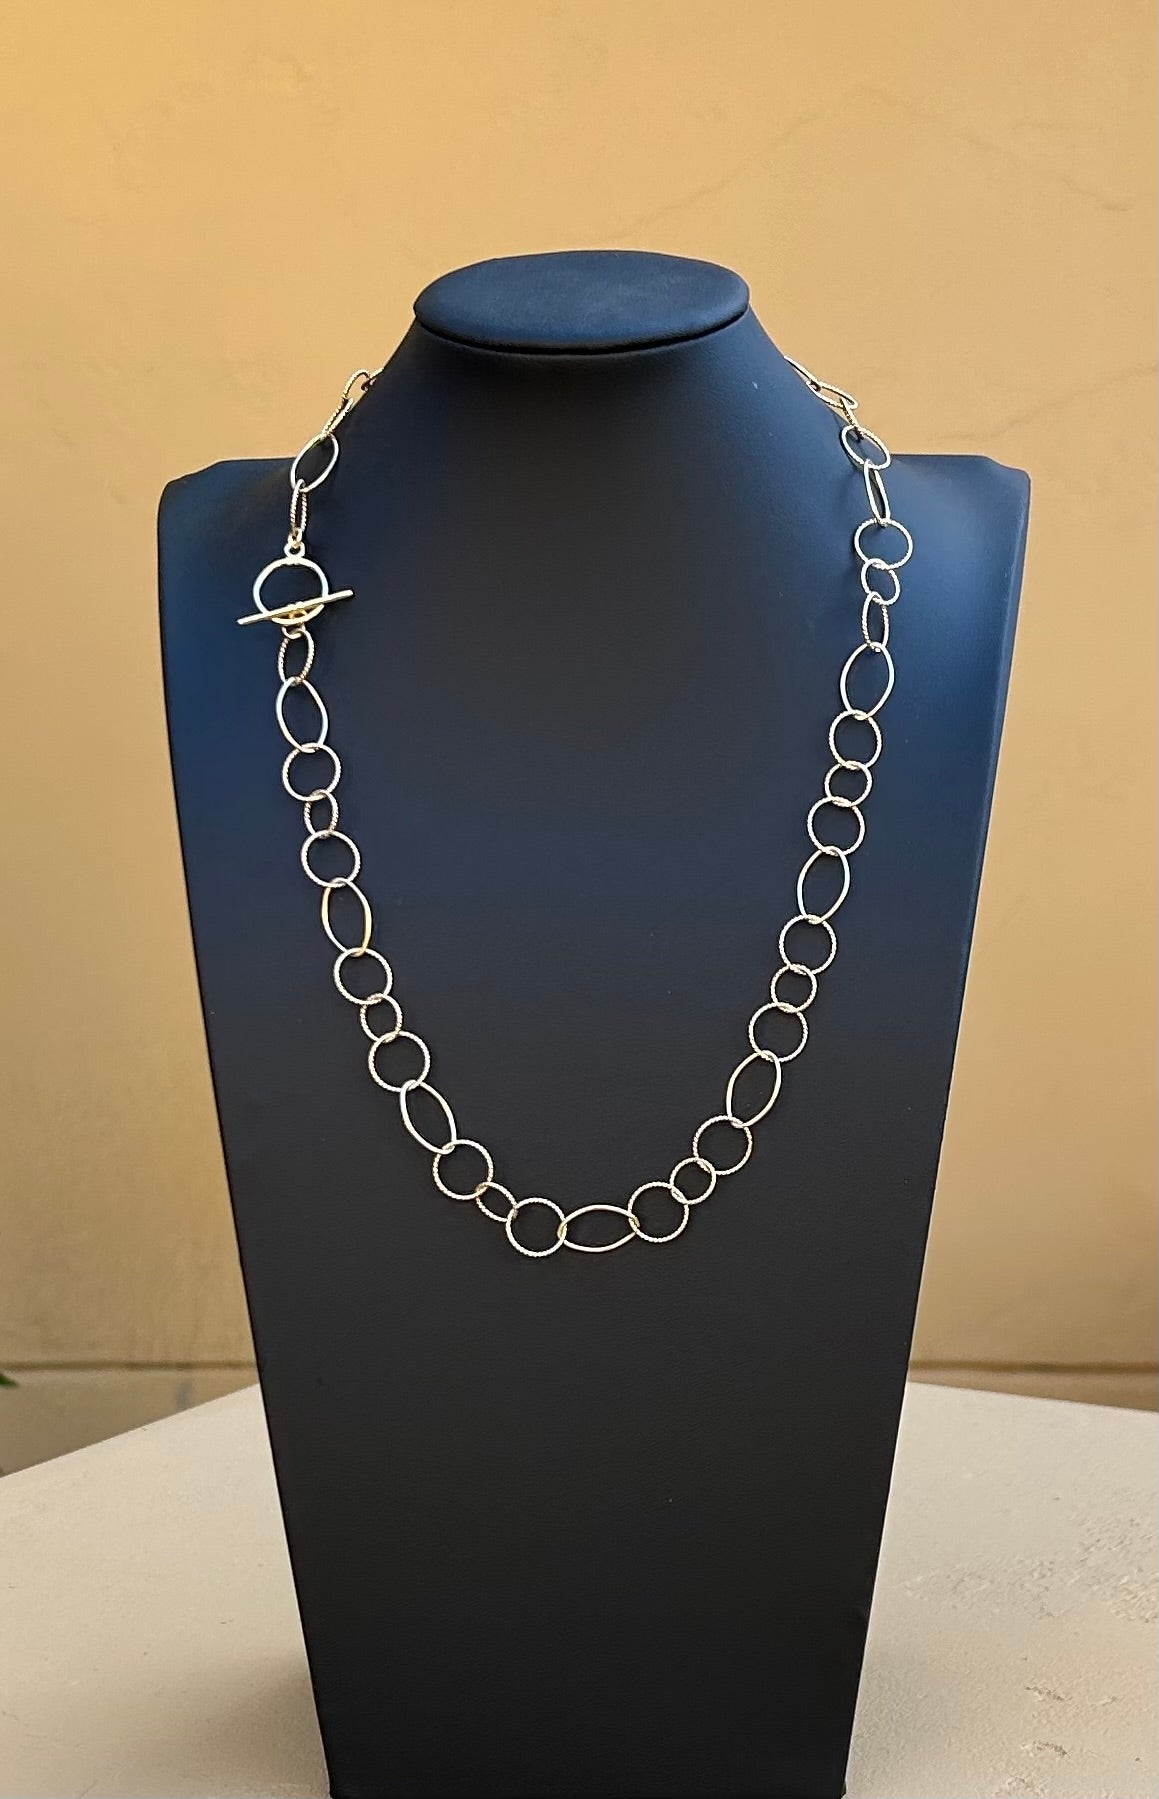 Necklace - Gold filled oval and round lightweight chain with large round toggle